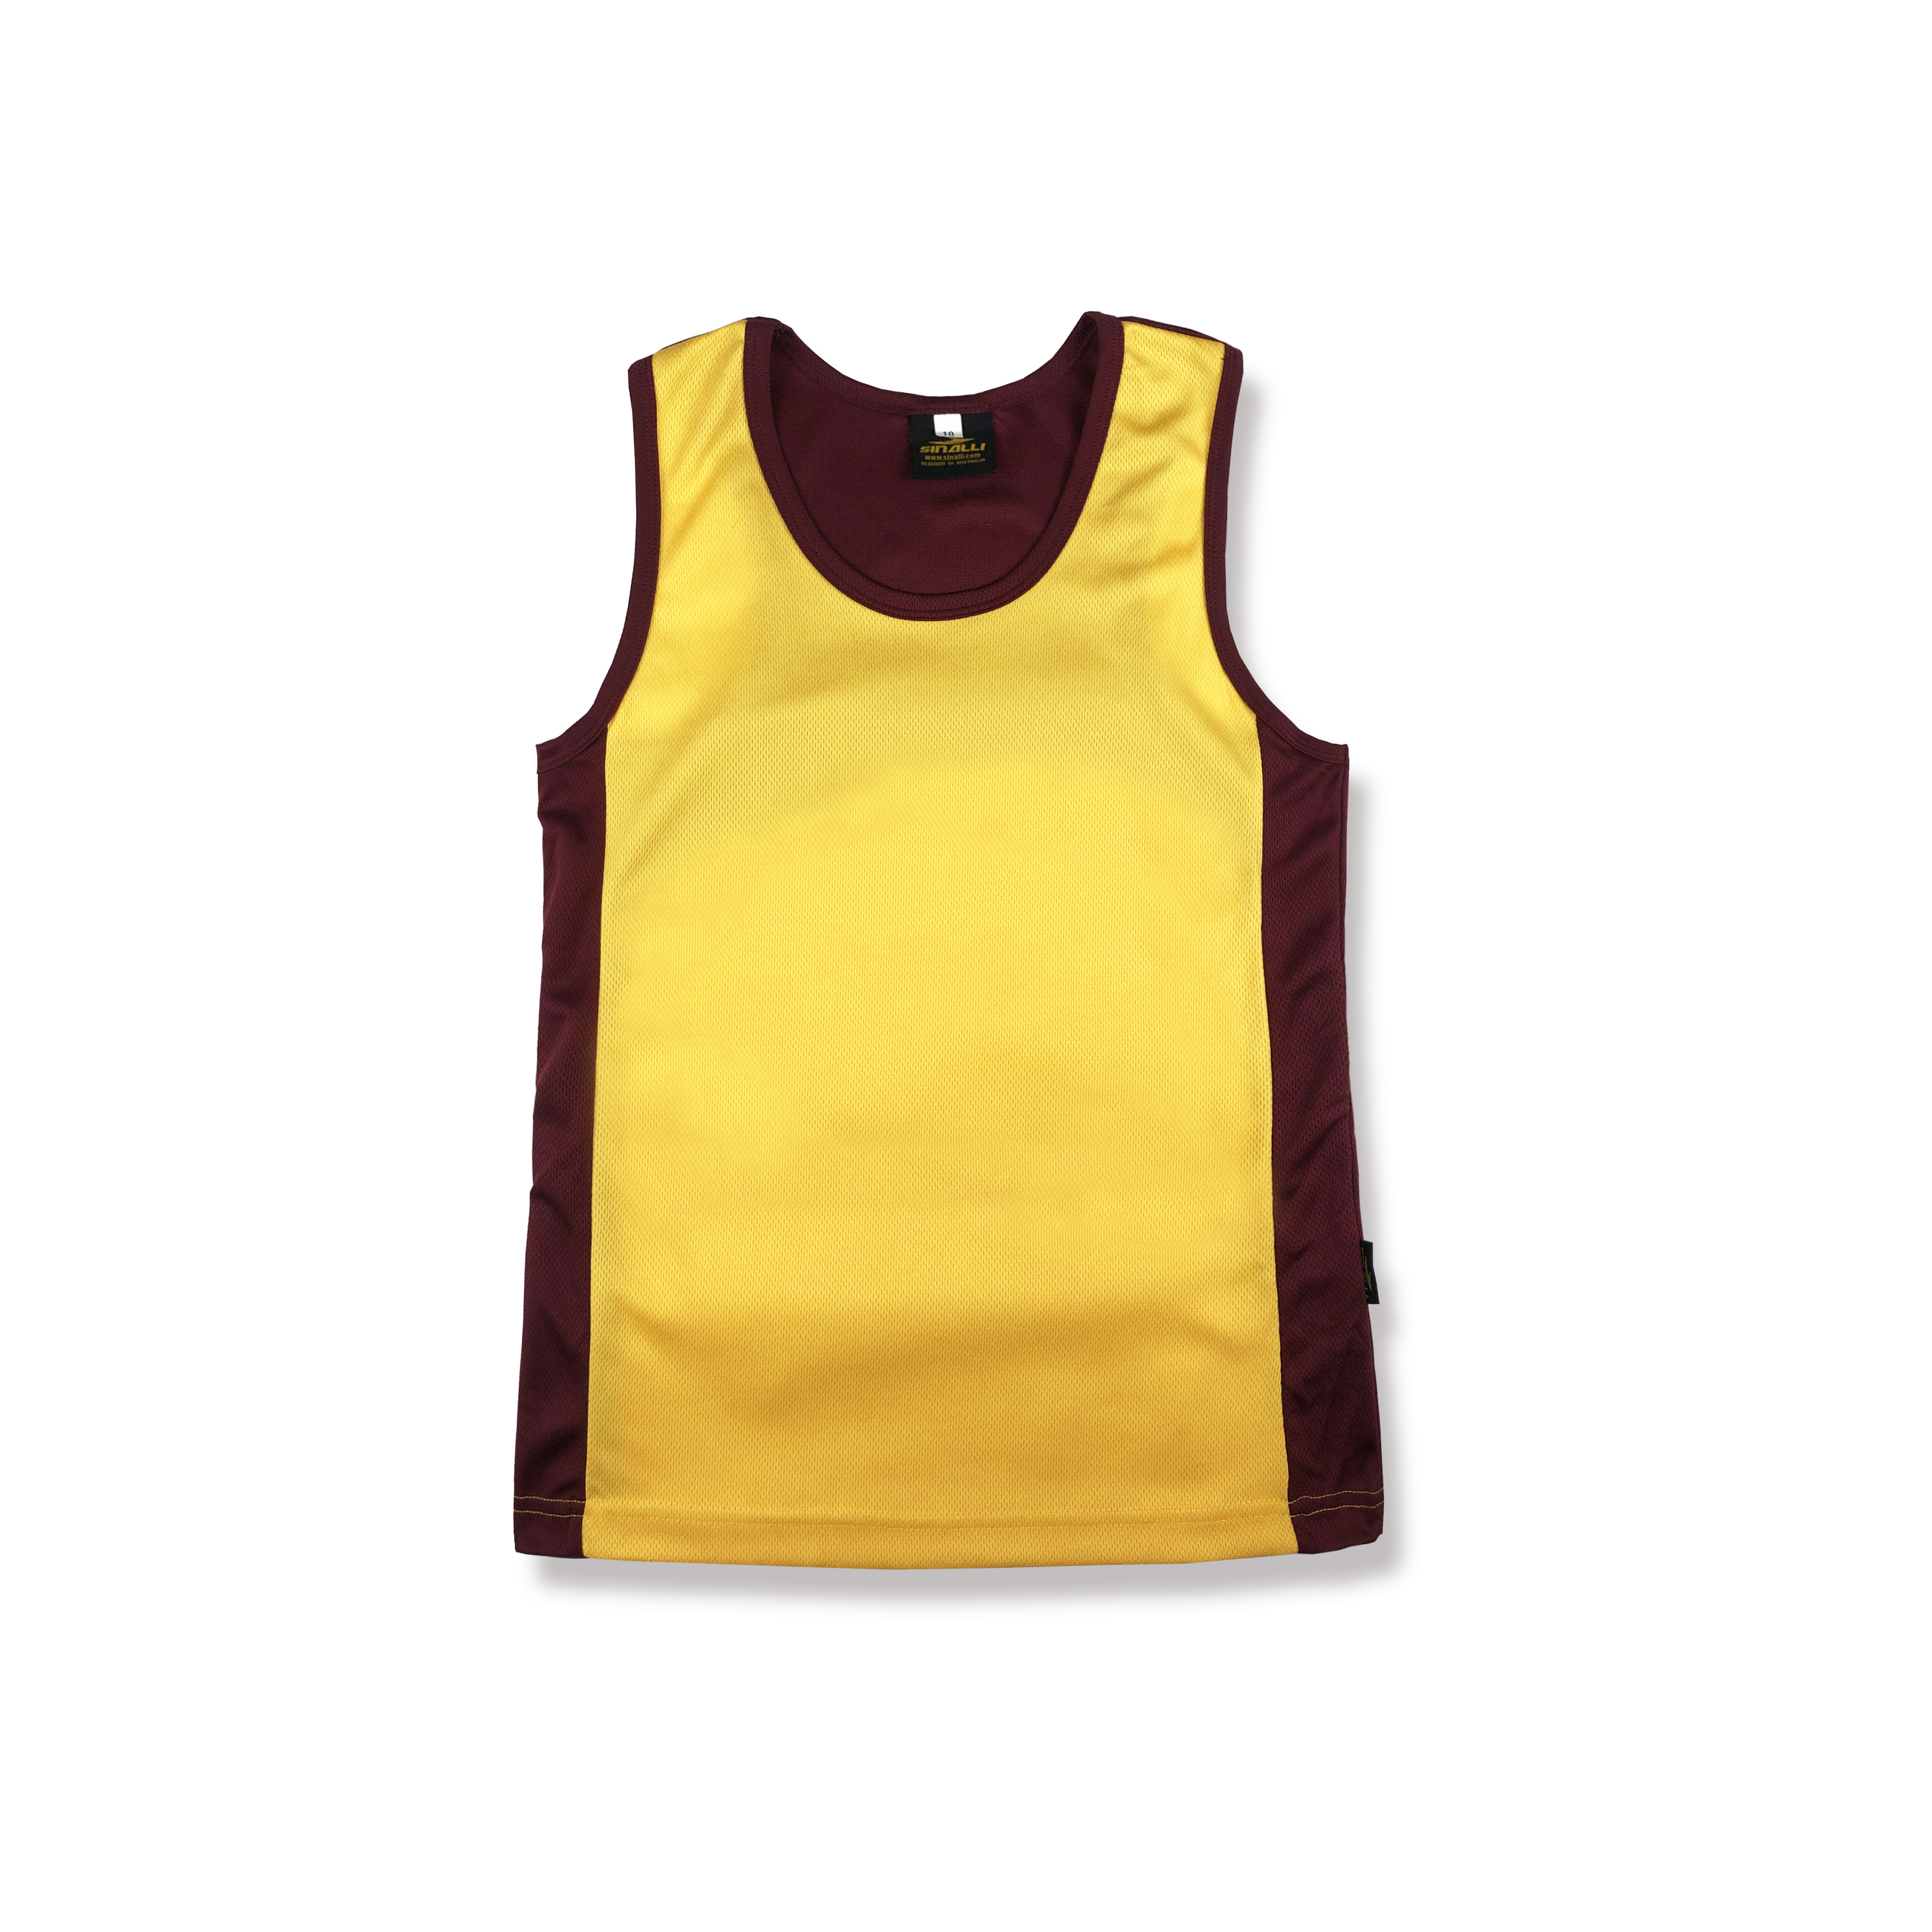 Advantages Of Sports Vests In Running Sports - Leading Custom